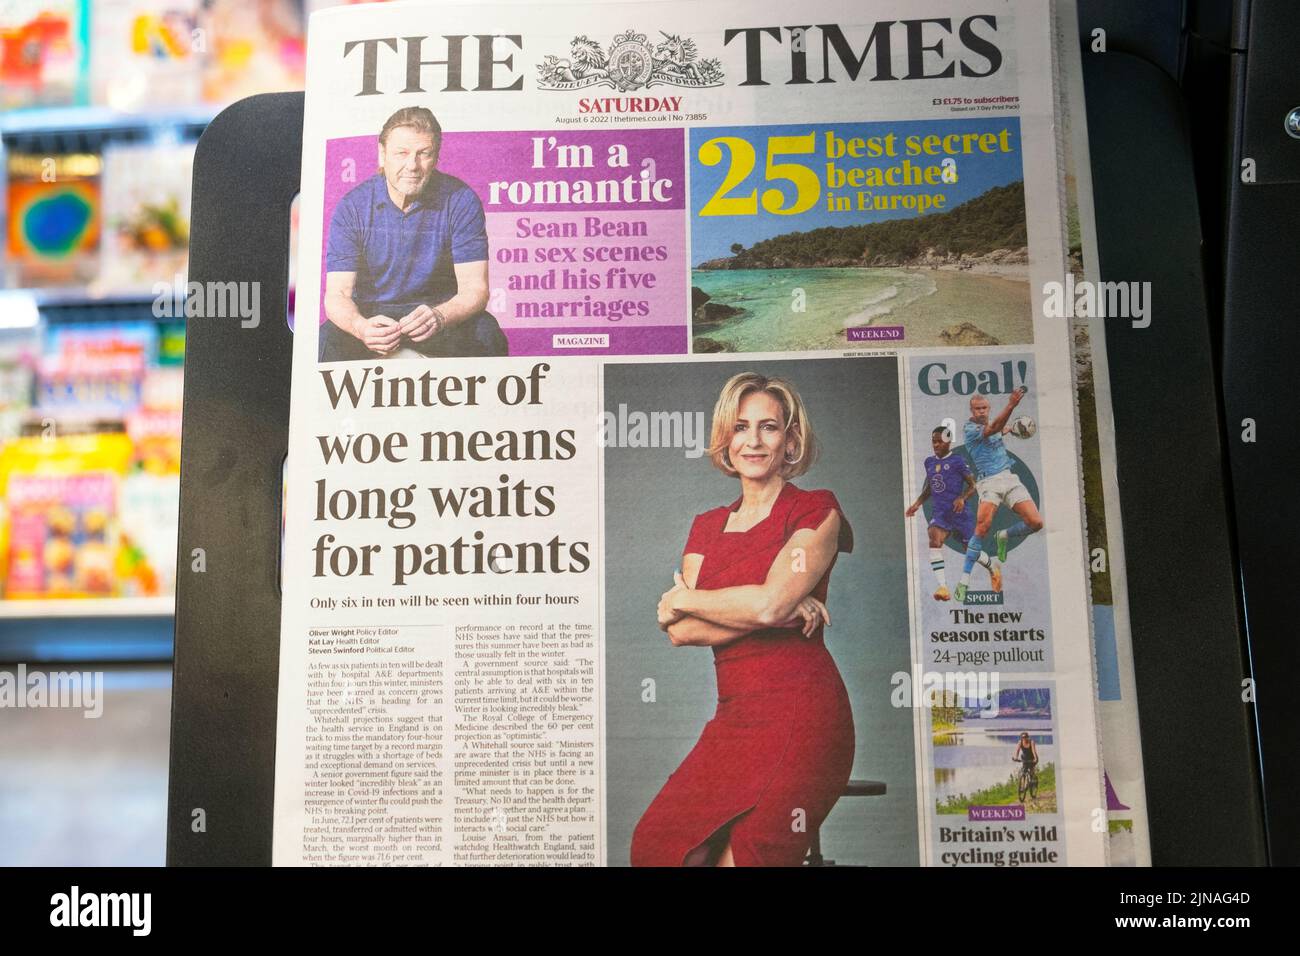 'Winter of woe means ong waits for patients' The Times newspaper headline front page on 6 August 2022 in London England UK Stock Photo